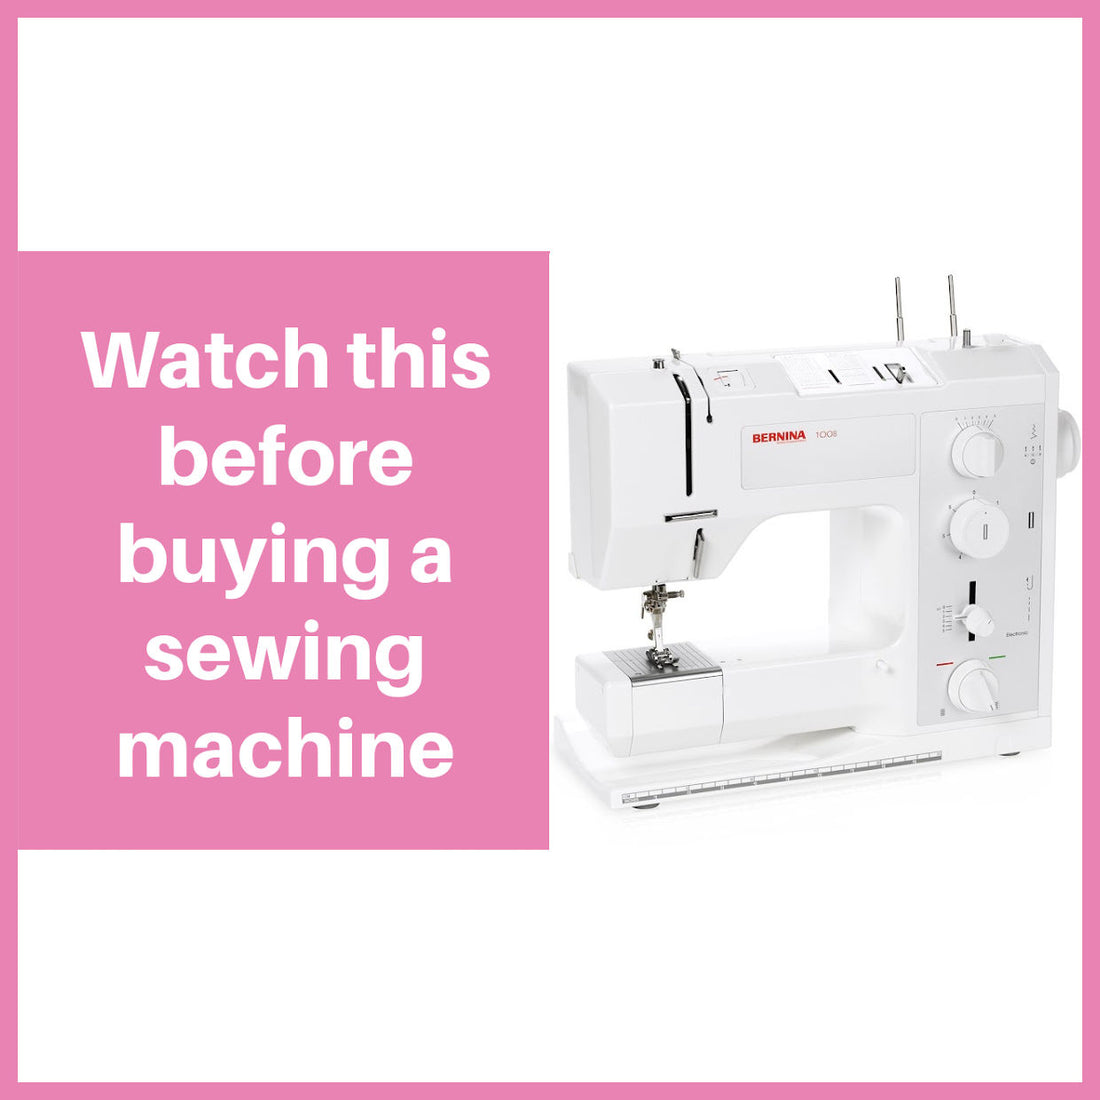 Watch this video before buying a new machine